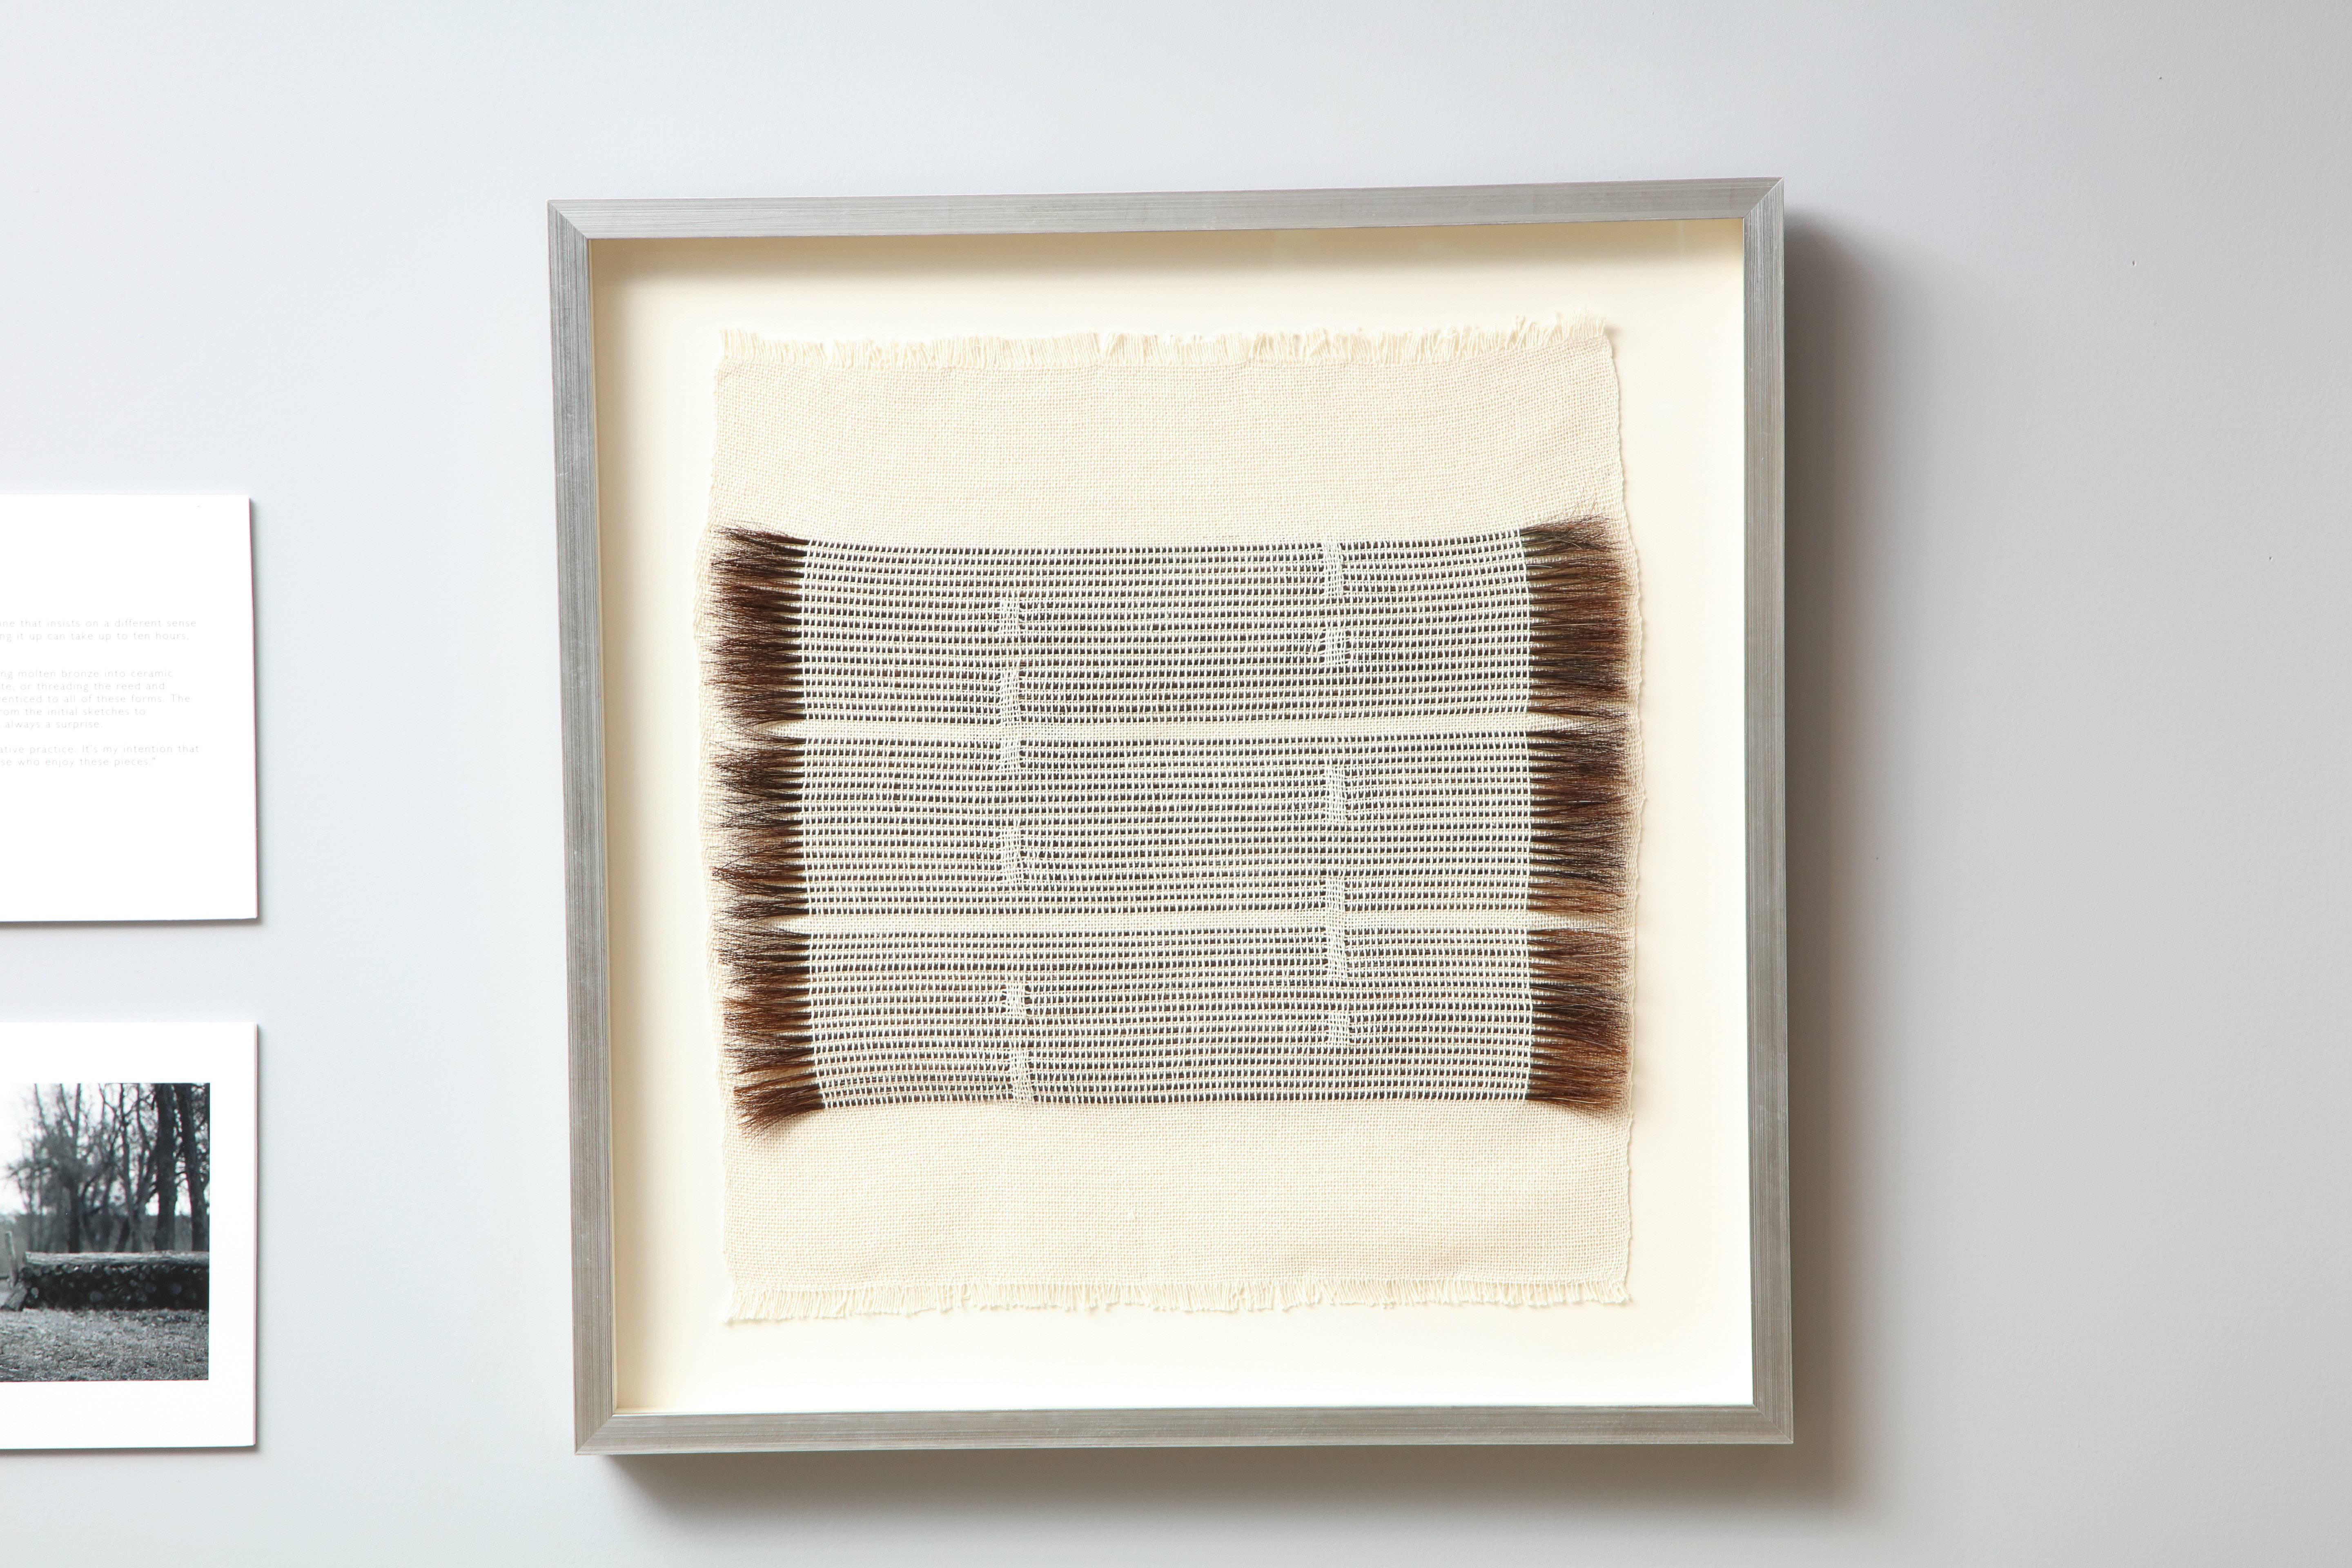 The young Alexandra Kohl's textile art has the meditative gravity of someone much farther along in her career. It seems to emerge from a Dual strain: the deceptively simple minimalism of Agnes Martin and the earthy strength of Anni Albers.

And